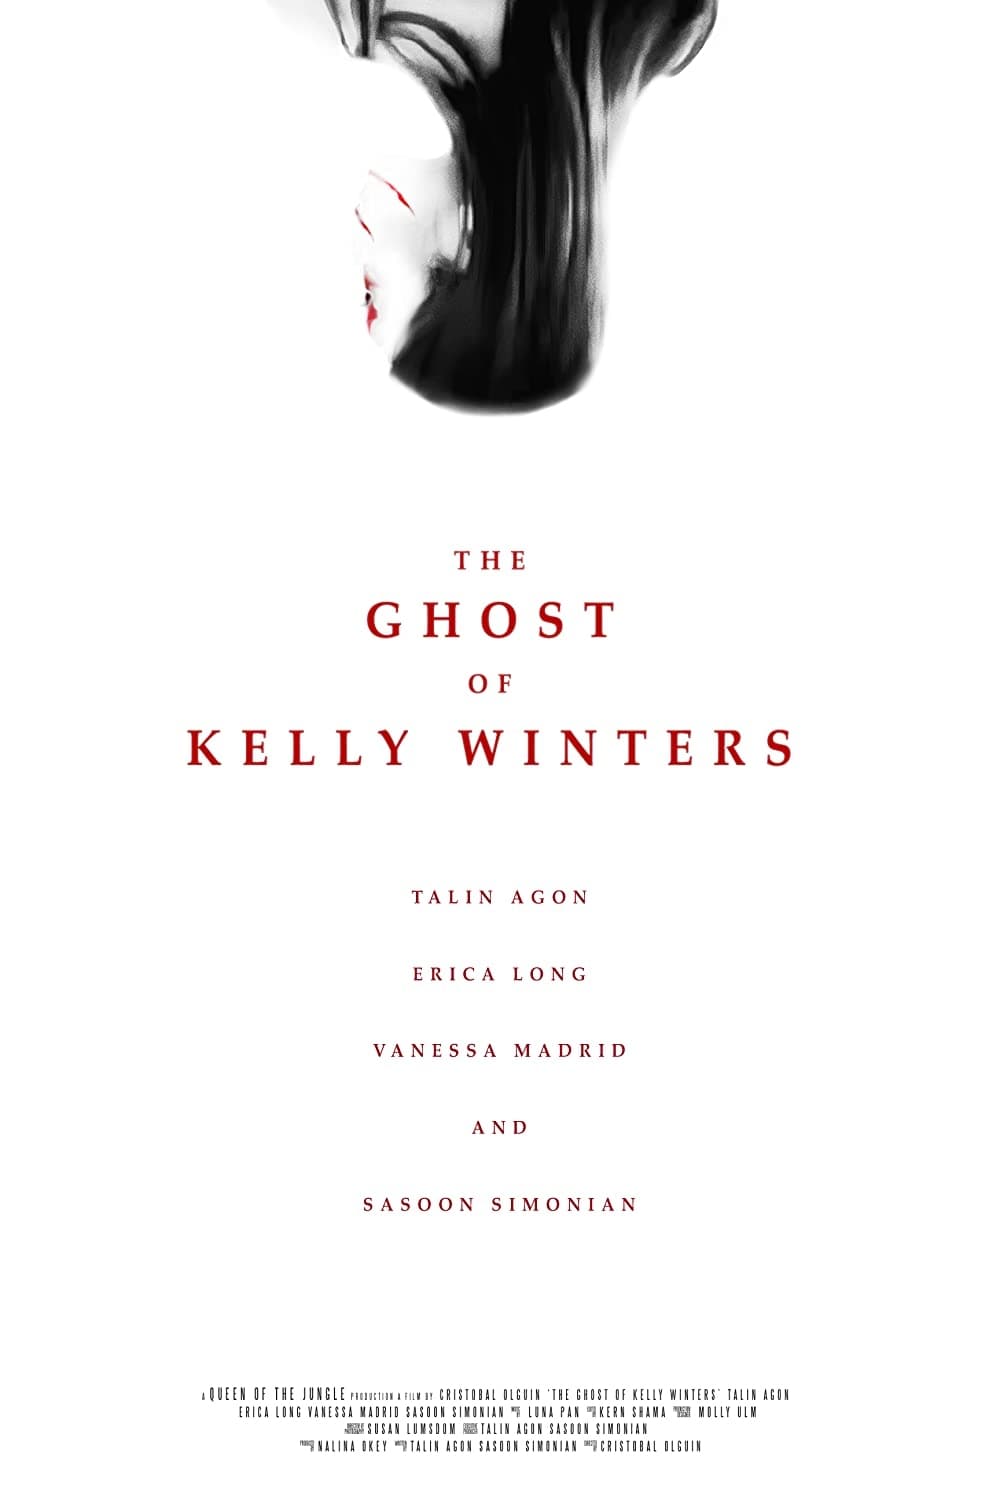 The Ghost of Kelly Winters